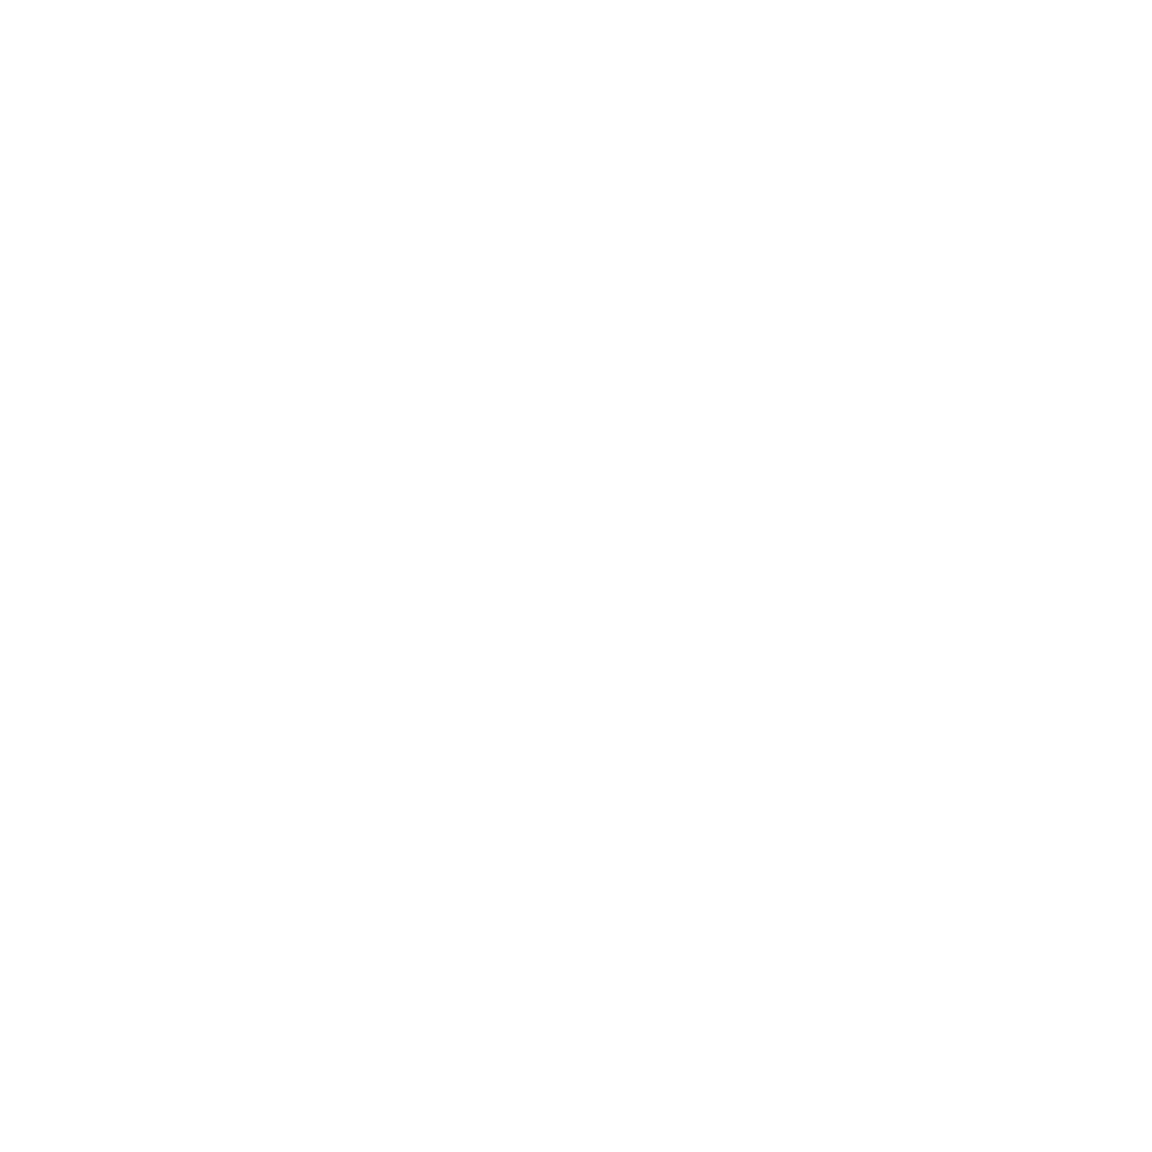 The Toolbox Collective